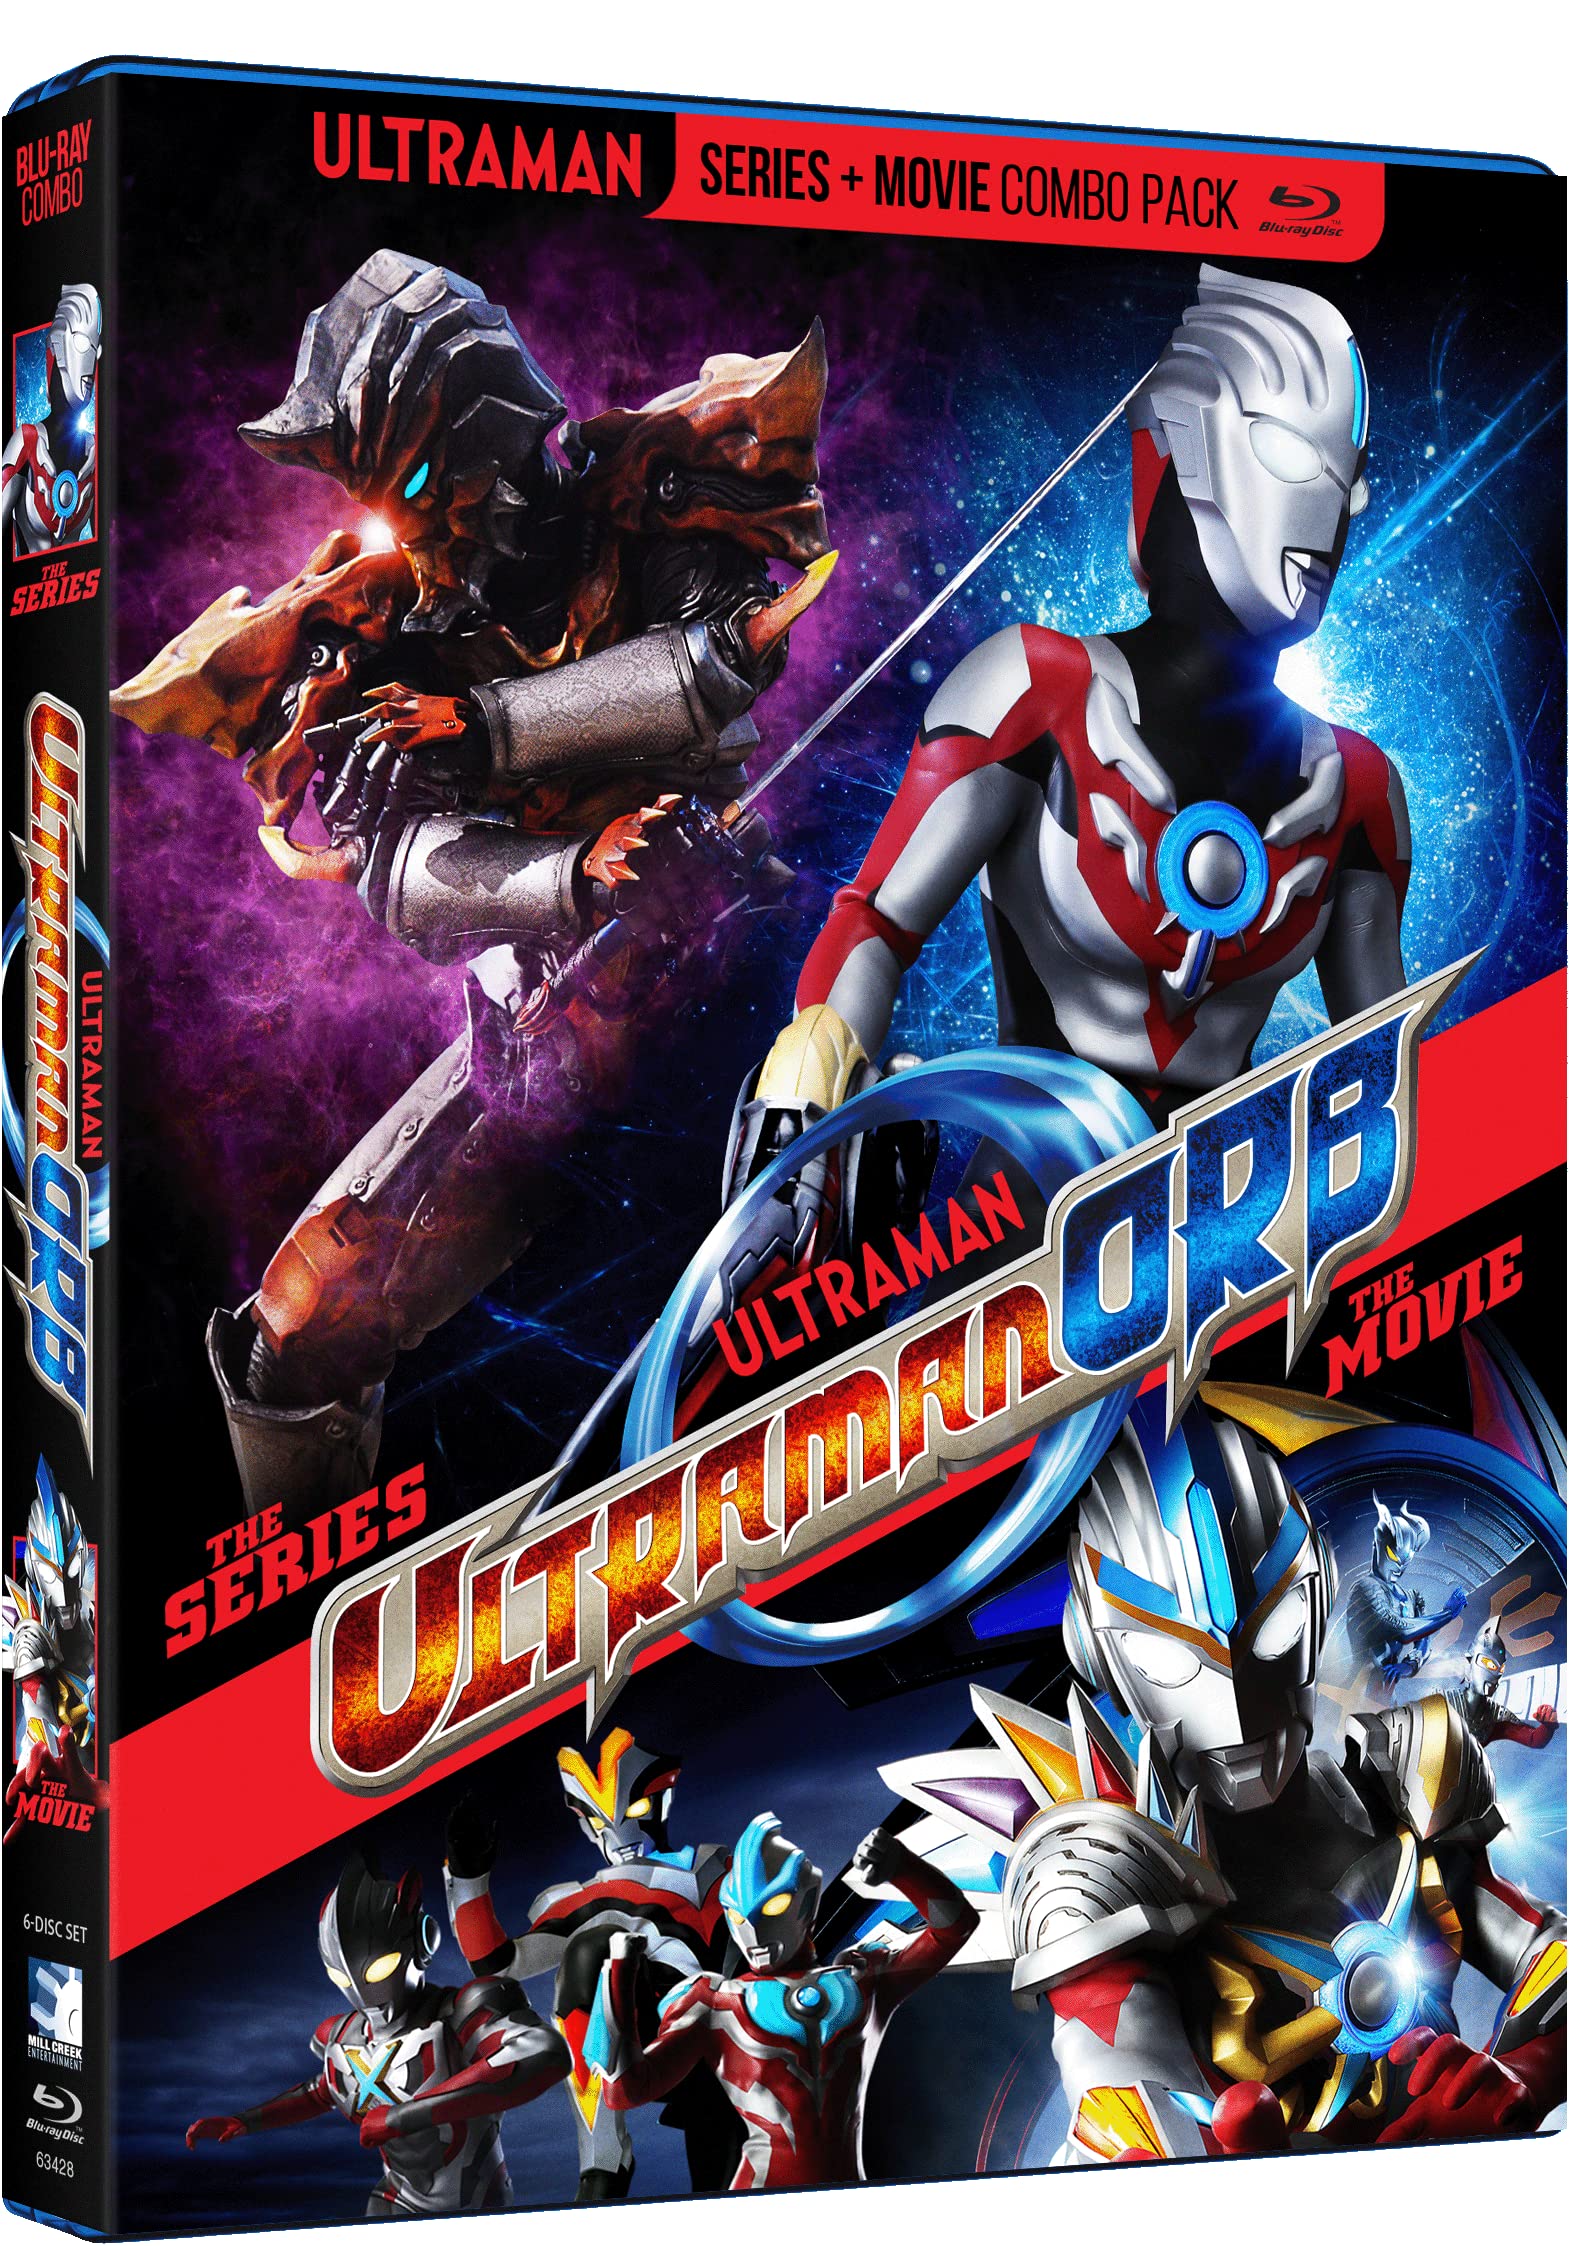 Ultraman Orb - Series & Movie [Blu-ray] and Other Ultra Series on Sale $8.99